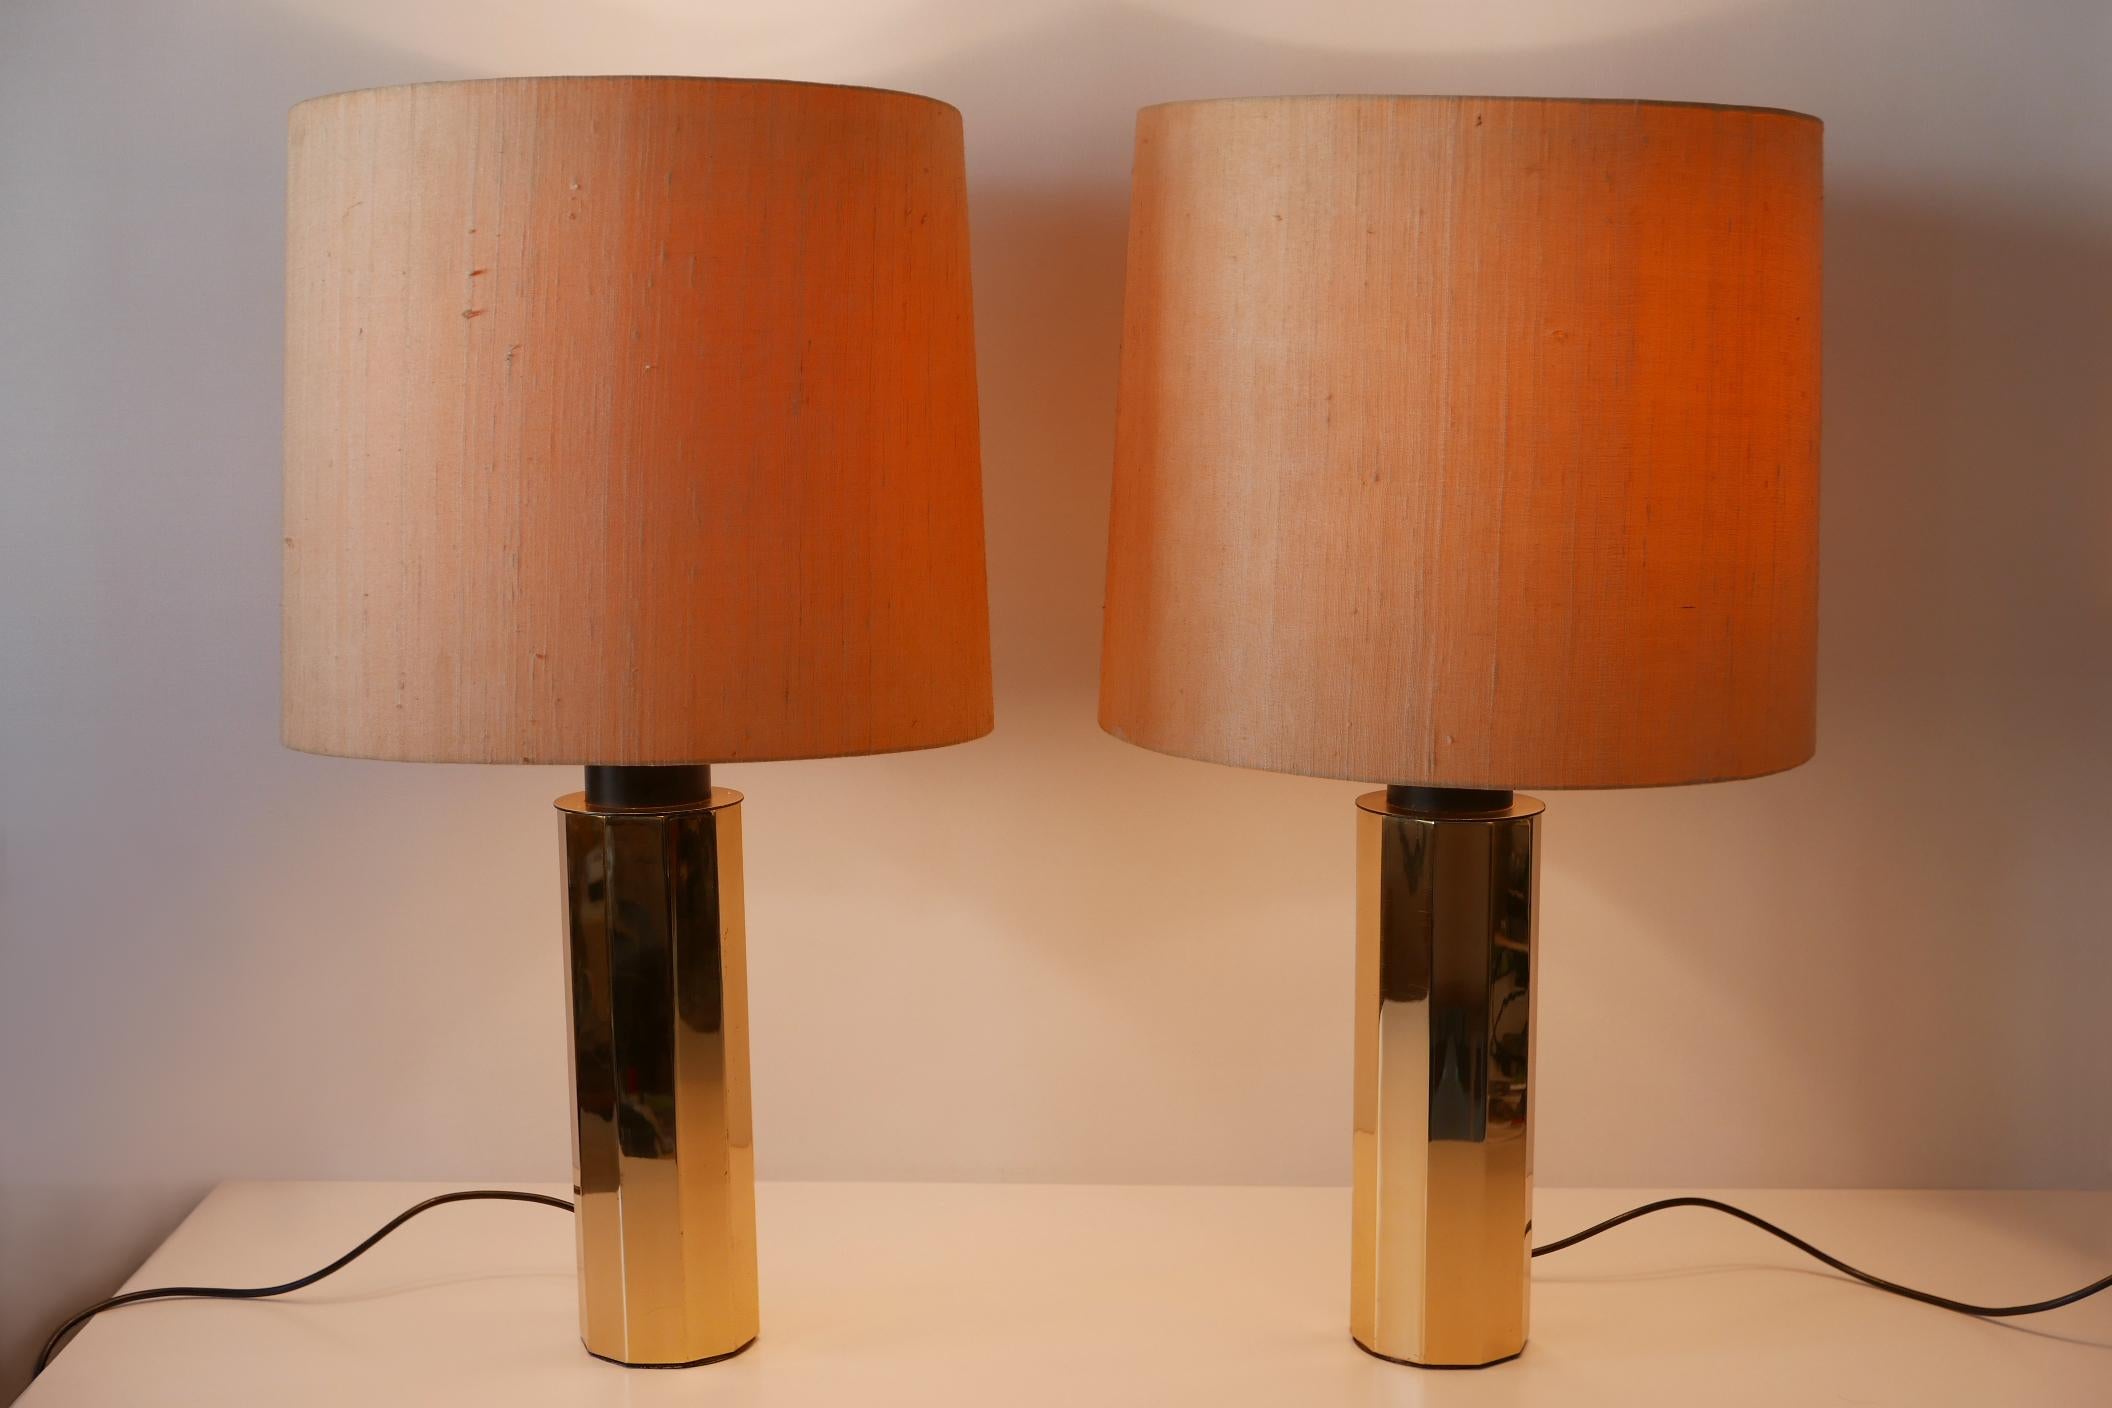 Lacquered Set of Two Huge, 5-Flamed Midcentury Decagonal Brass Table Lamps, 1960s, Germany For Sale